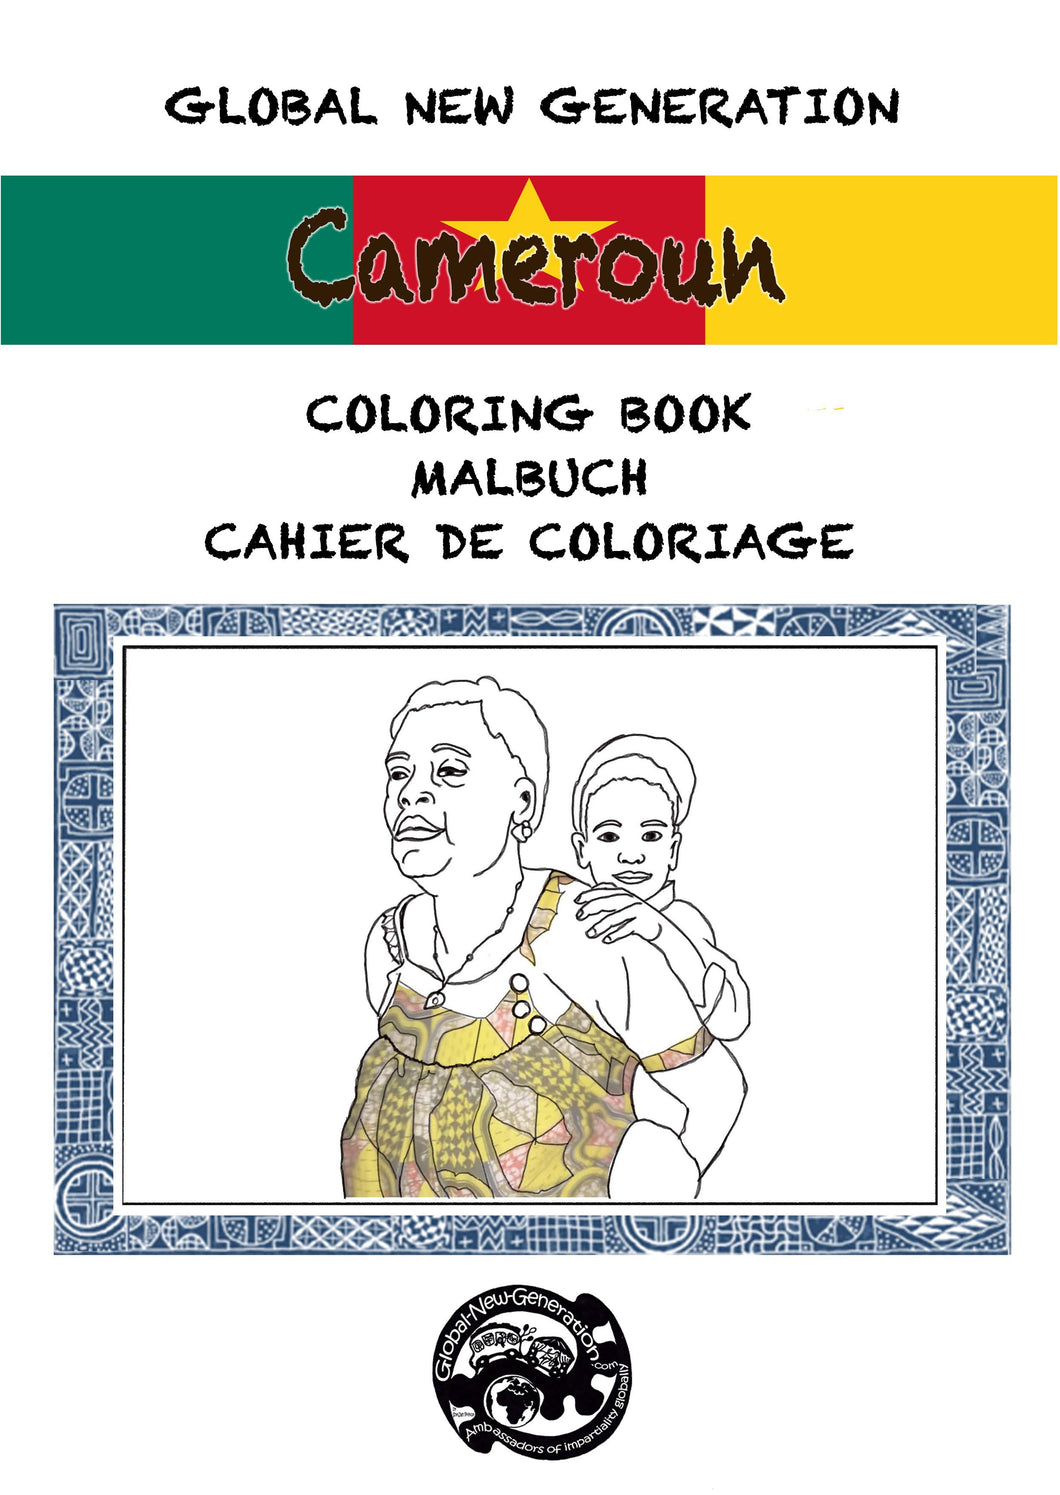 Cameroon coloring book, the country